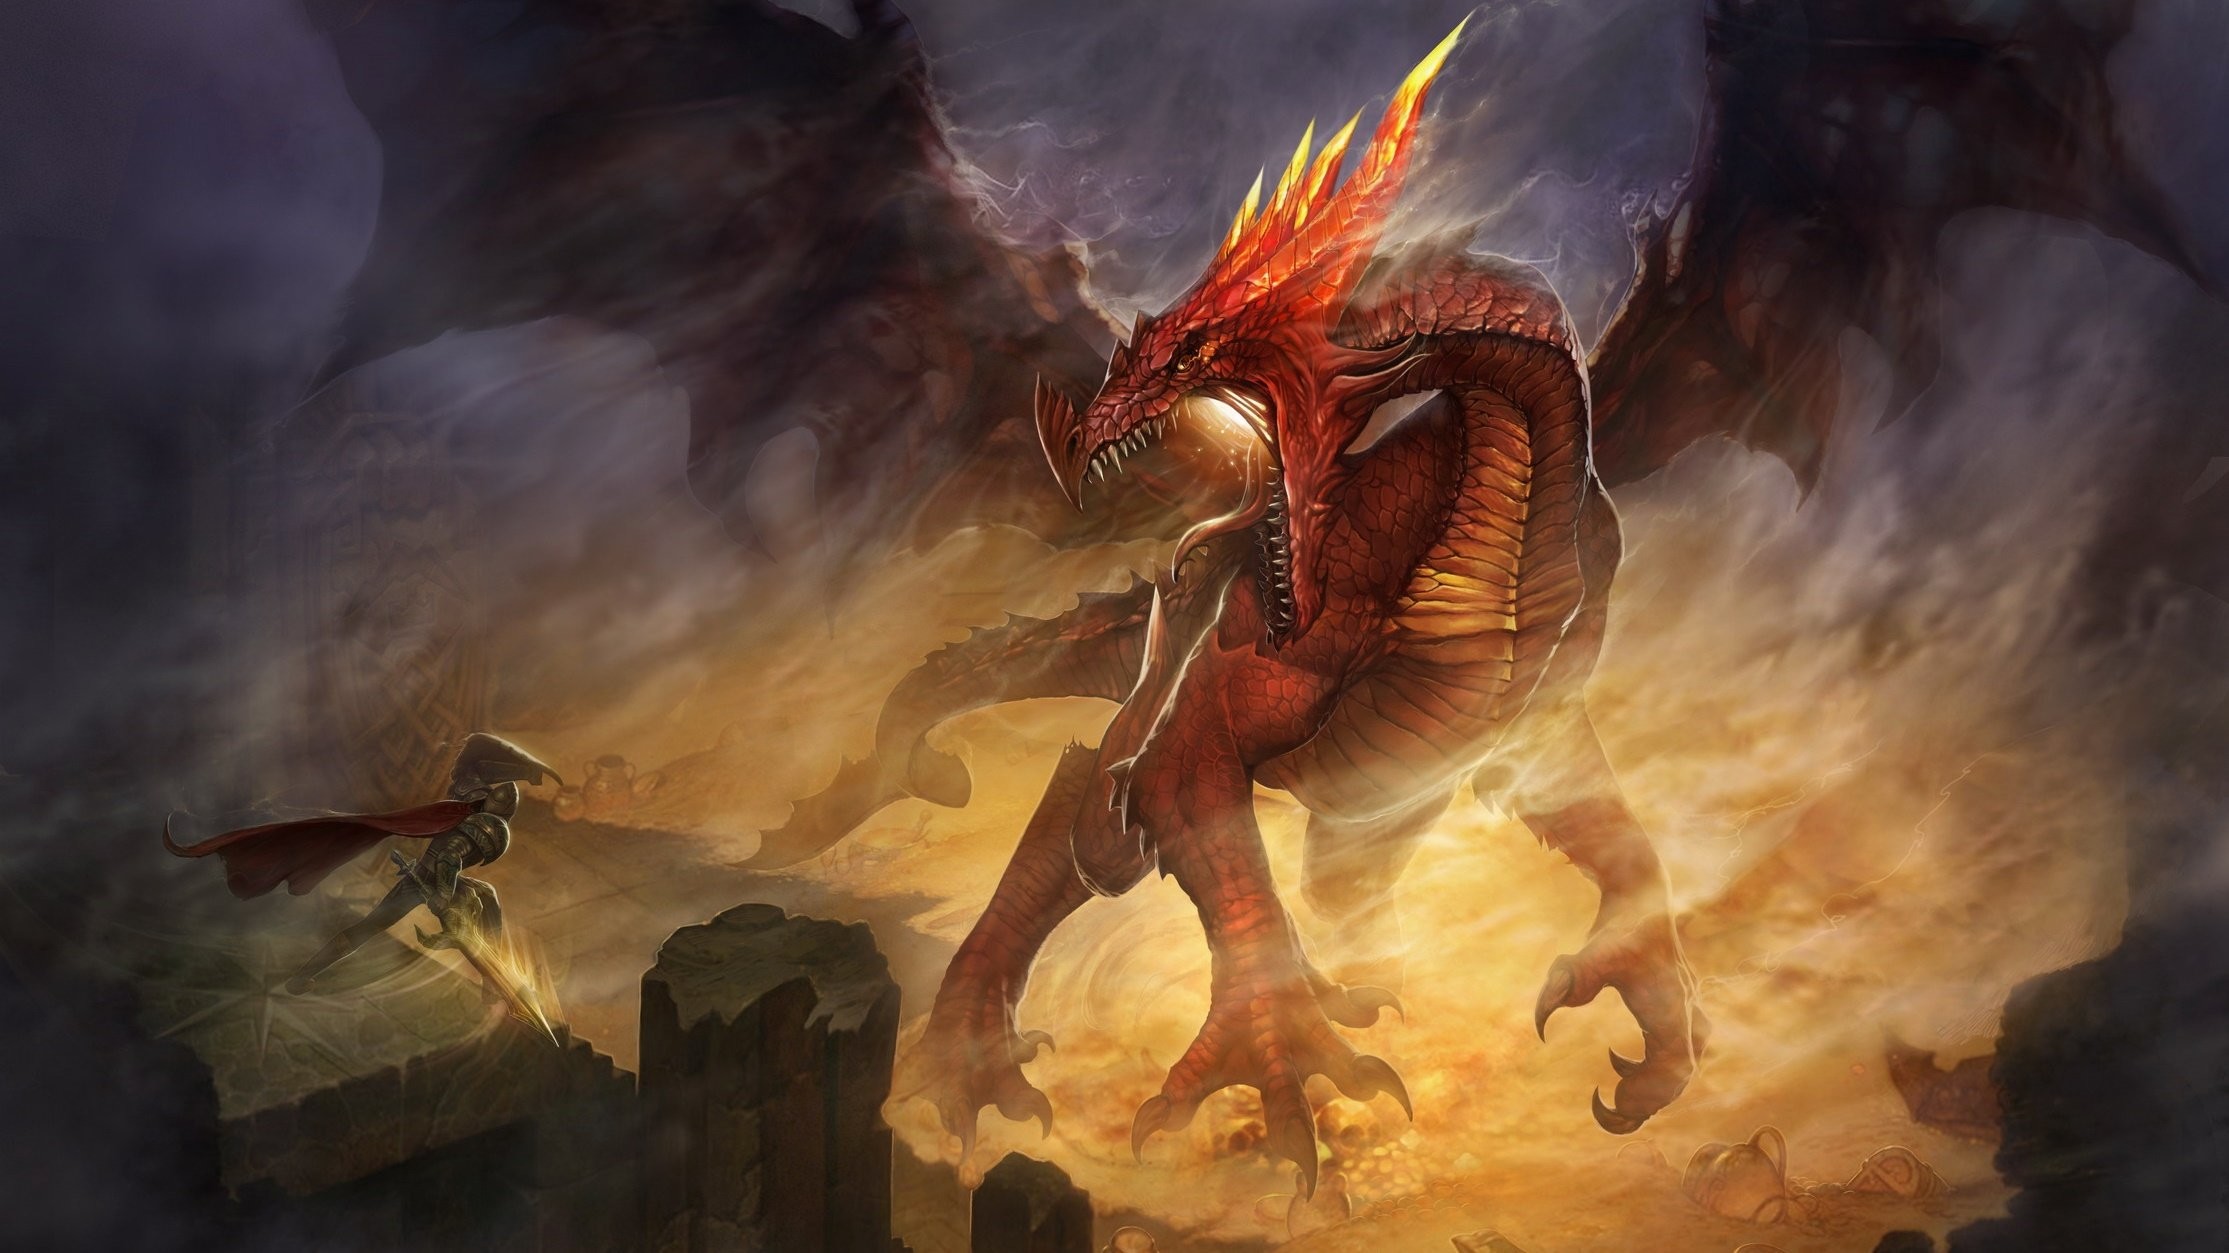 Dragon, Wallpapers Metal Fantasy: Heavy Metal wallpapers, pictures and .